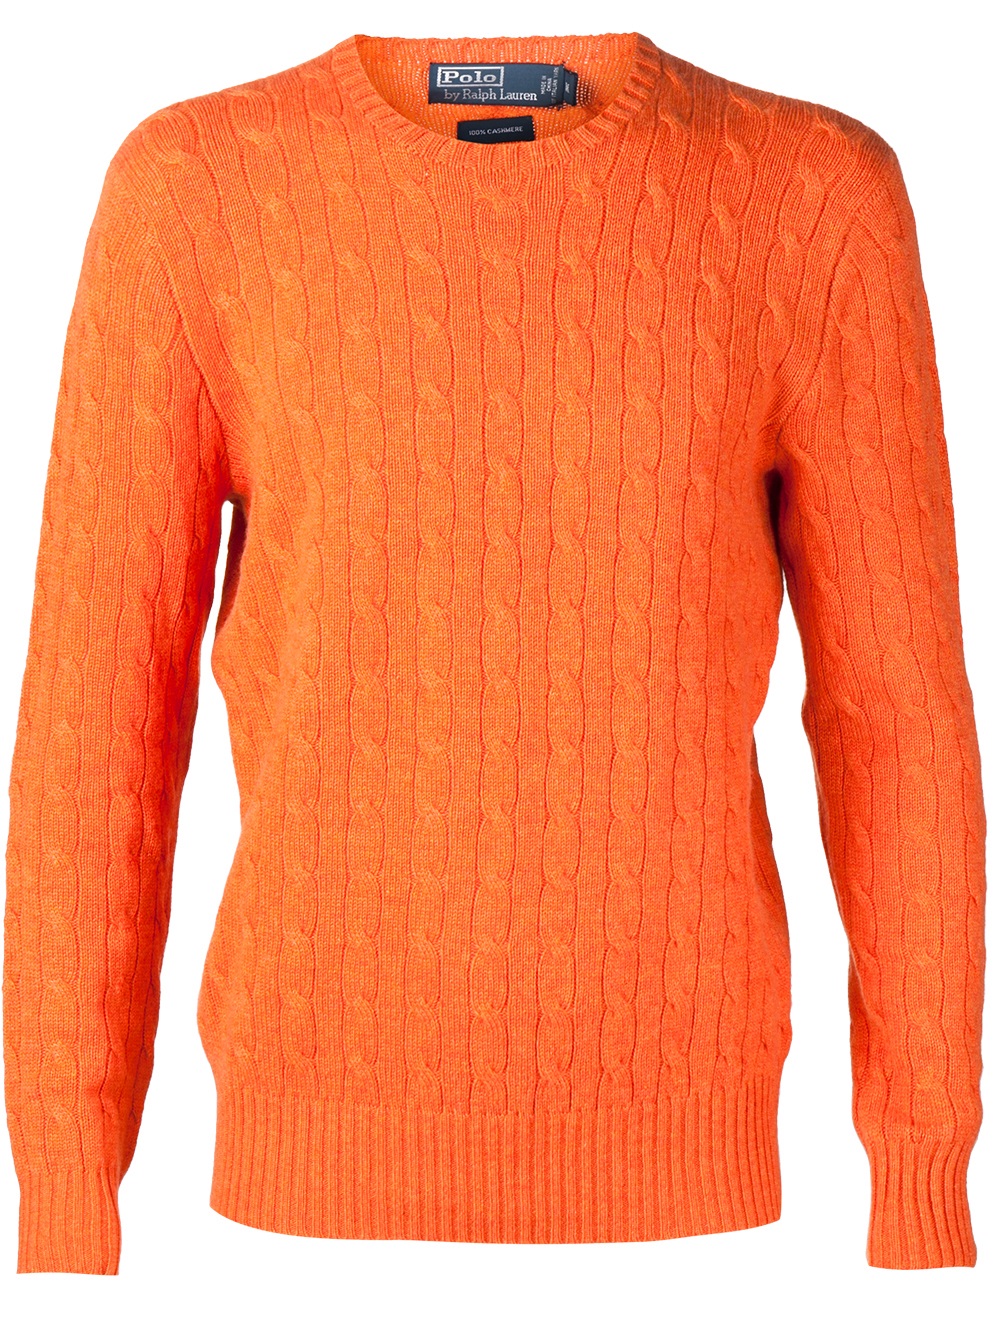 Lyst - Polo Ralph Lauren Cashmere Cable Knit Sweater in Orange for Men